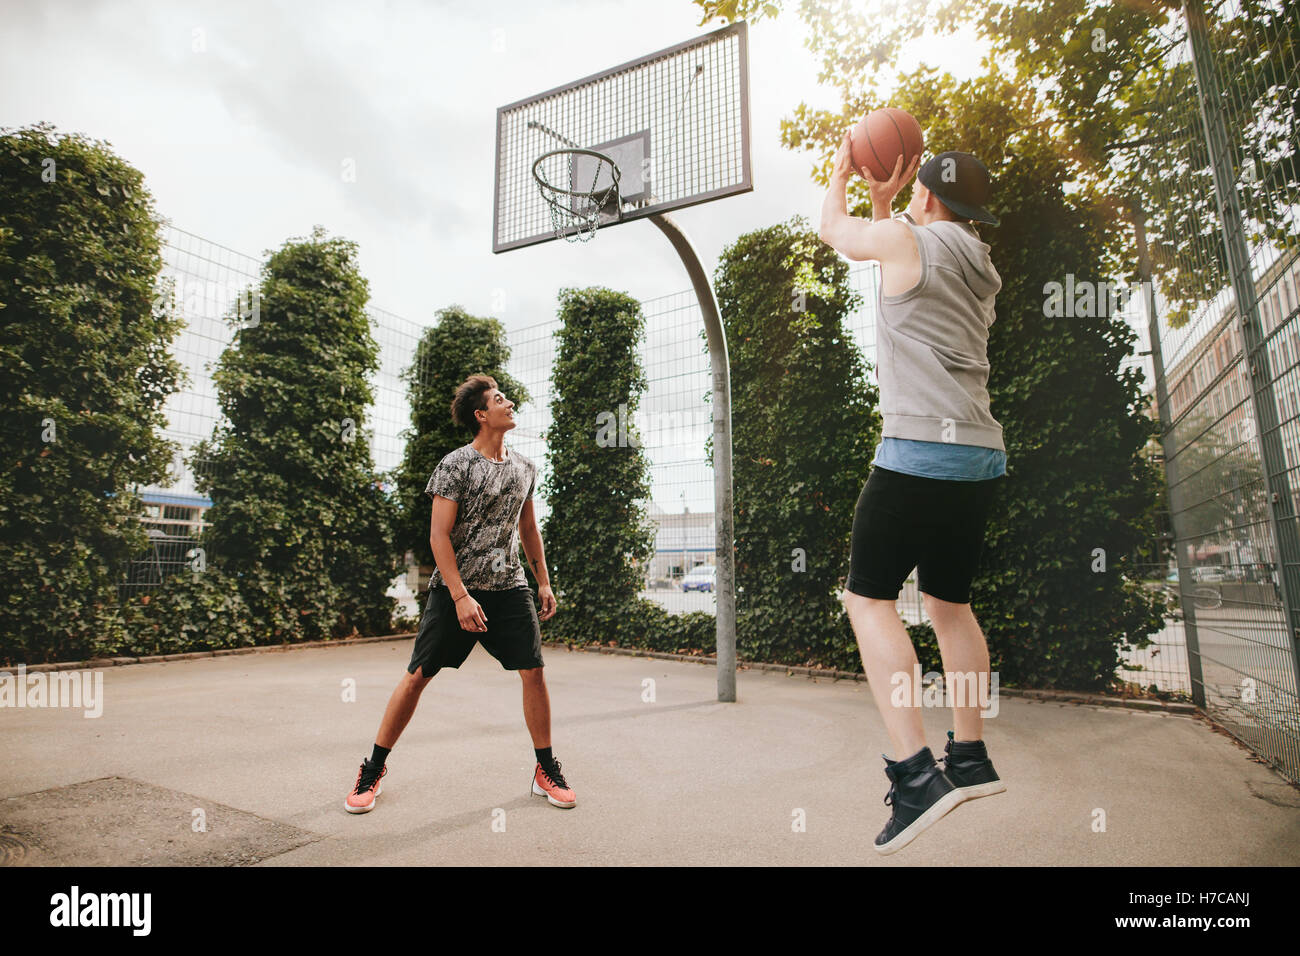 Young man taking jump shot with friend on basketball court. Streetball players having fun on court. Two teenage friends playing Stock Photo